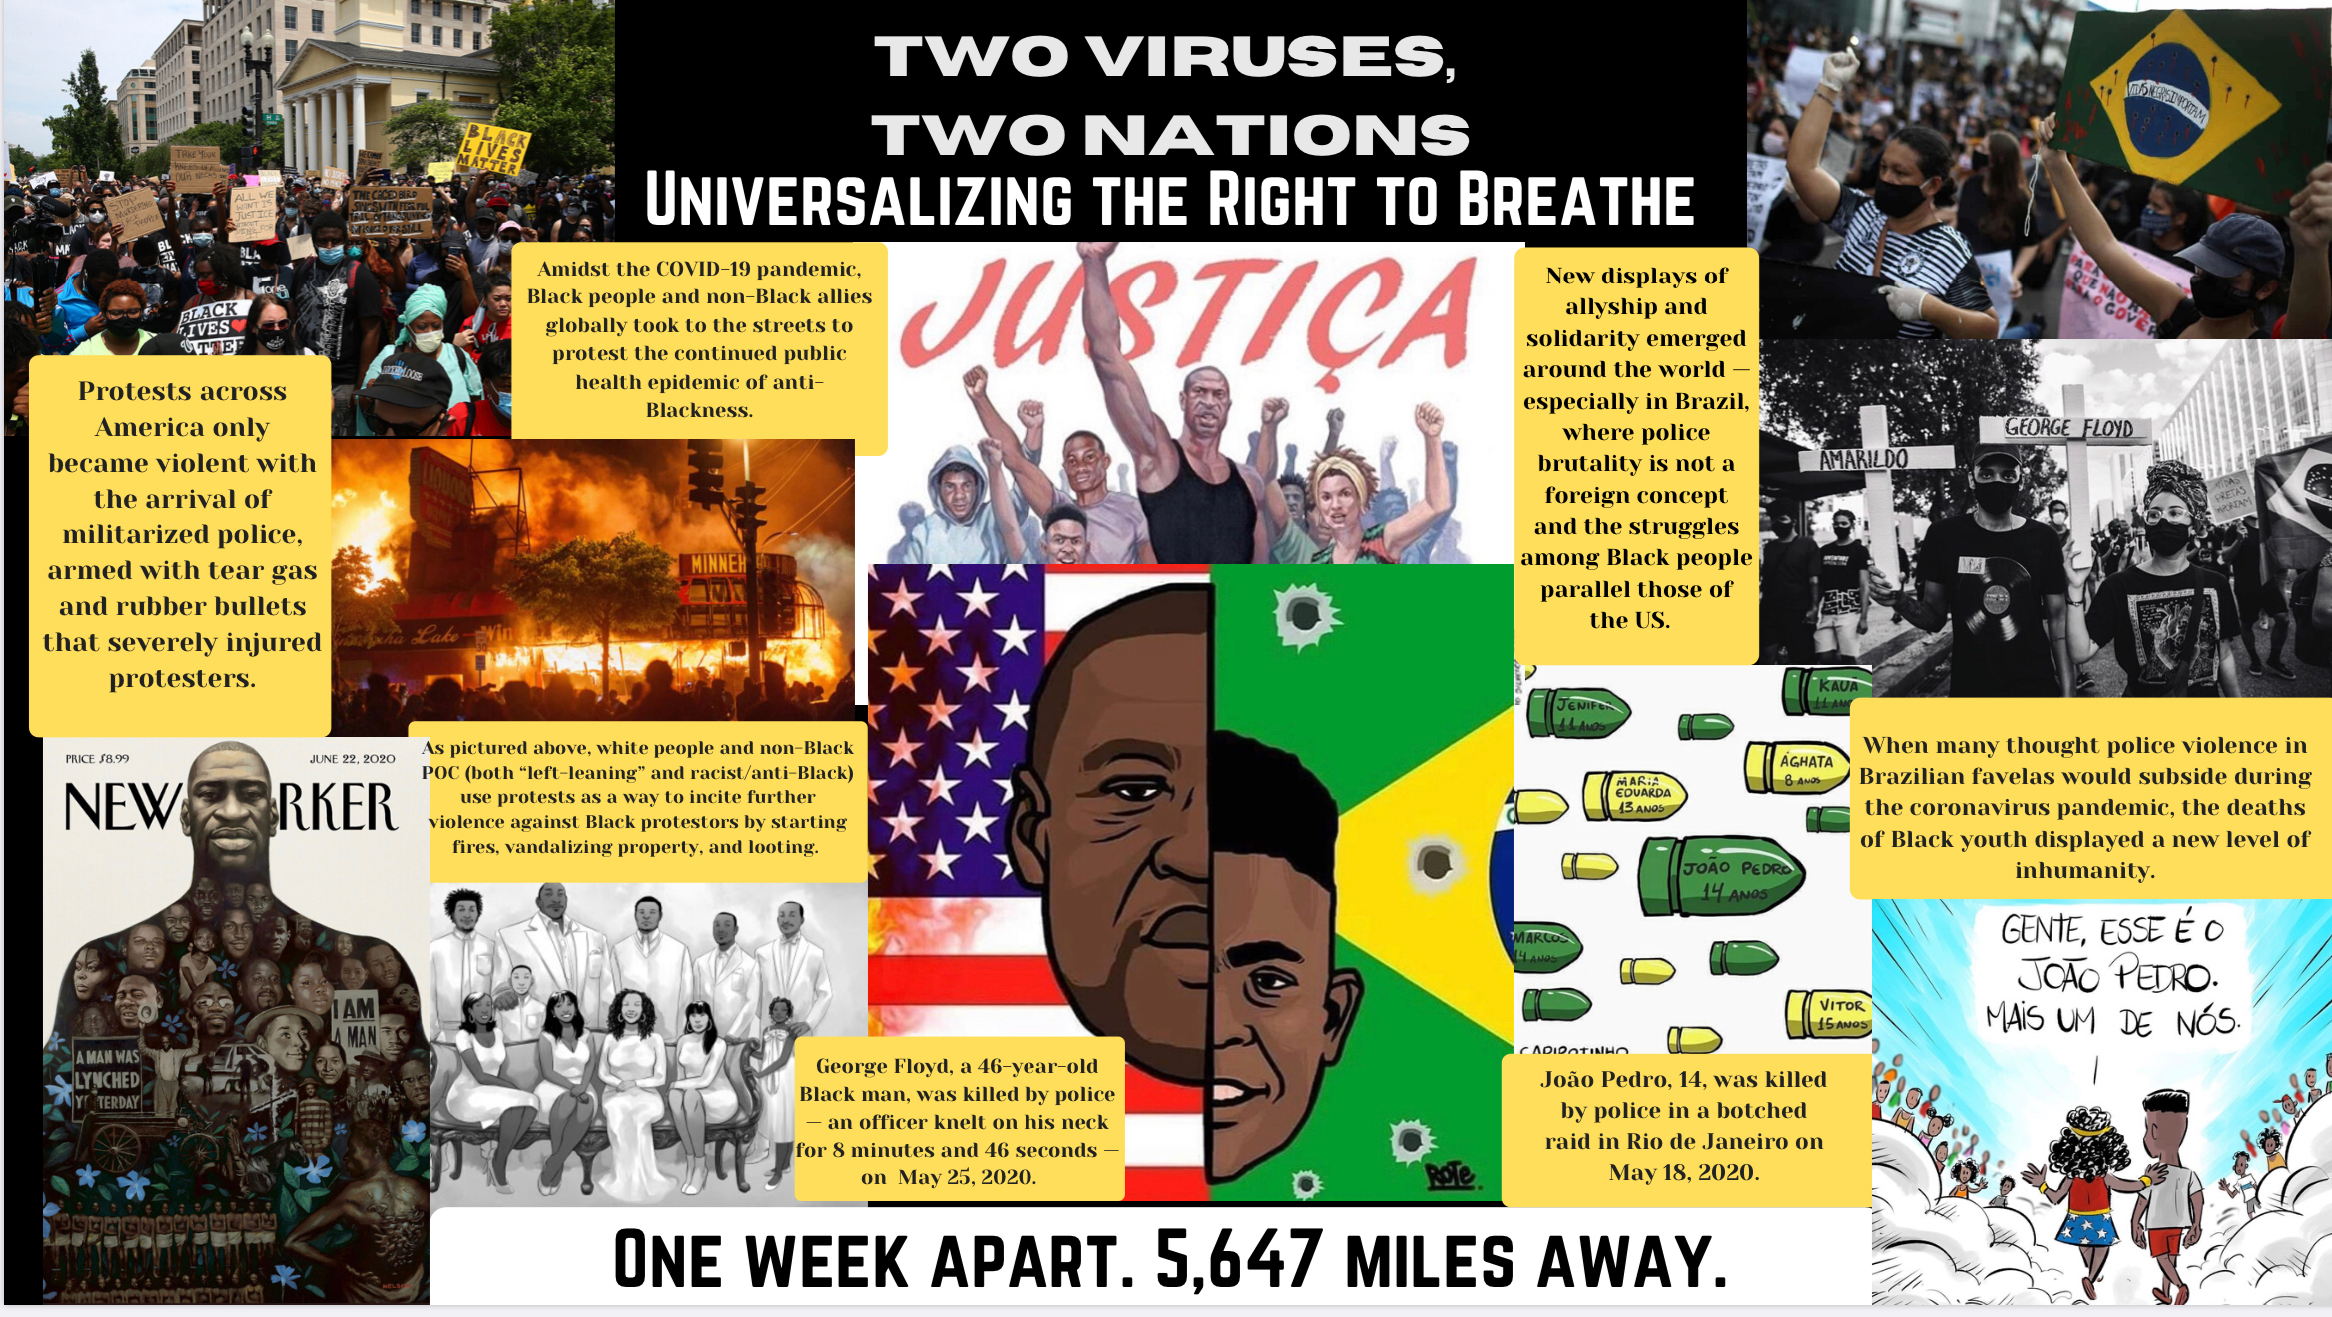 5.1 Two Viruses, Two Nations: Universalizing the Right to Breathe